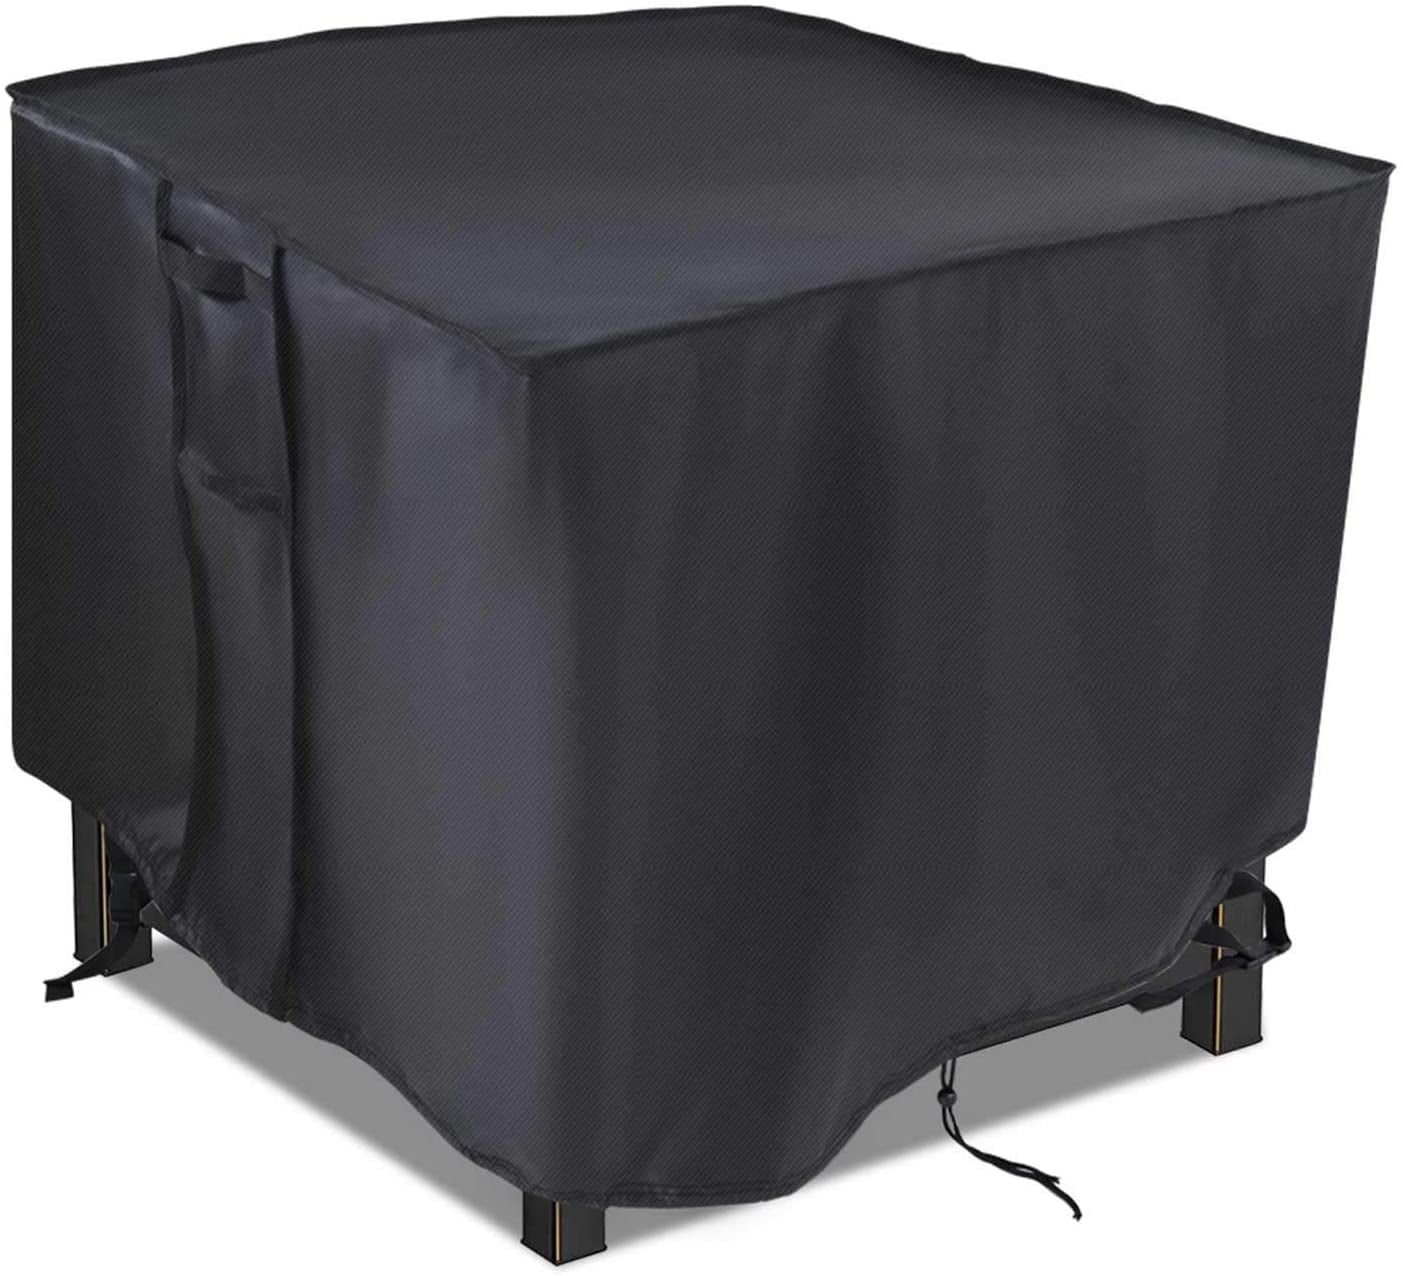 Saking Patio Fire Pit Cover Round 44 inch Waterproof Windproof Anti-UV Heavy D 